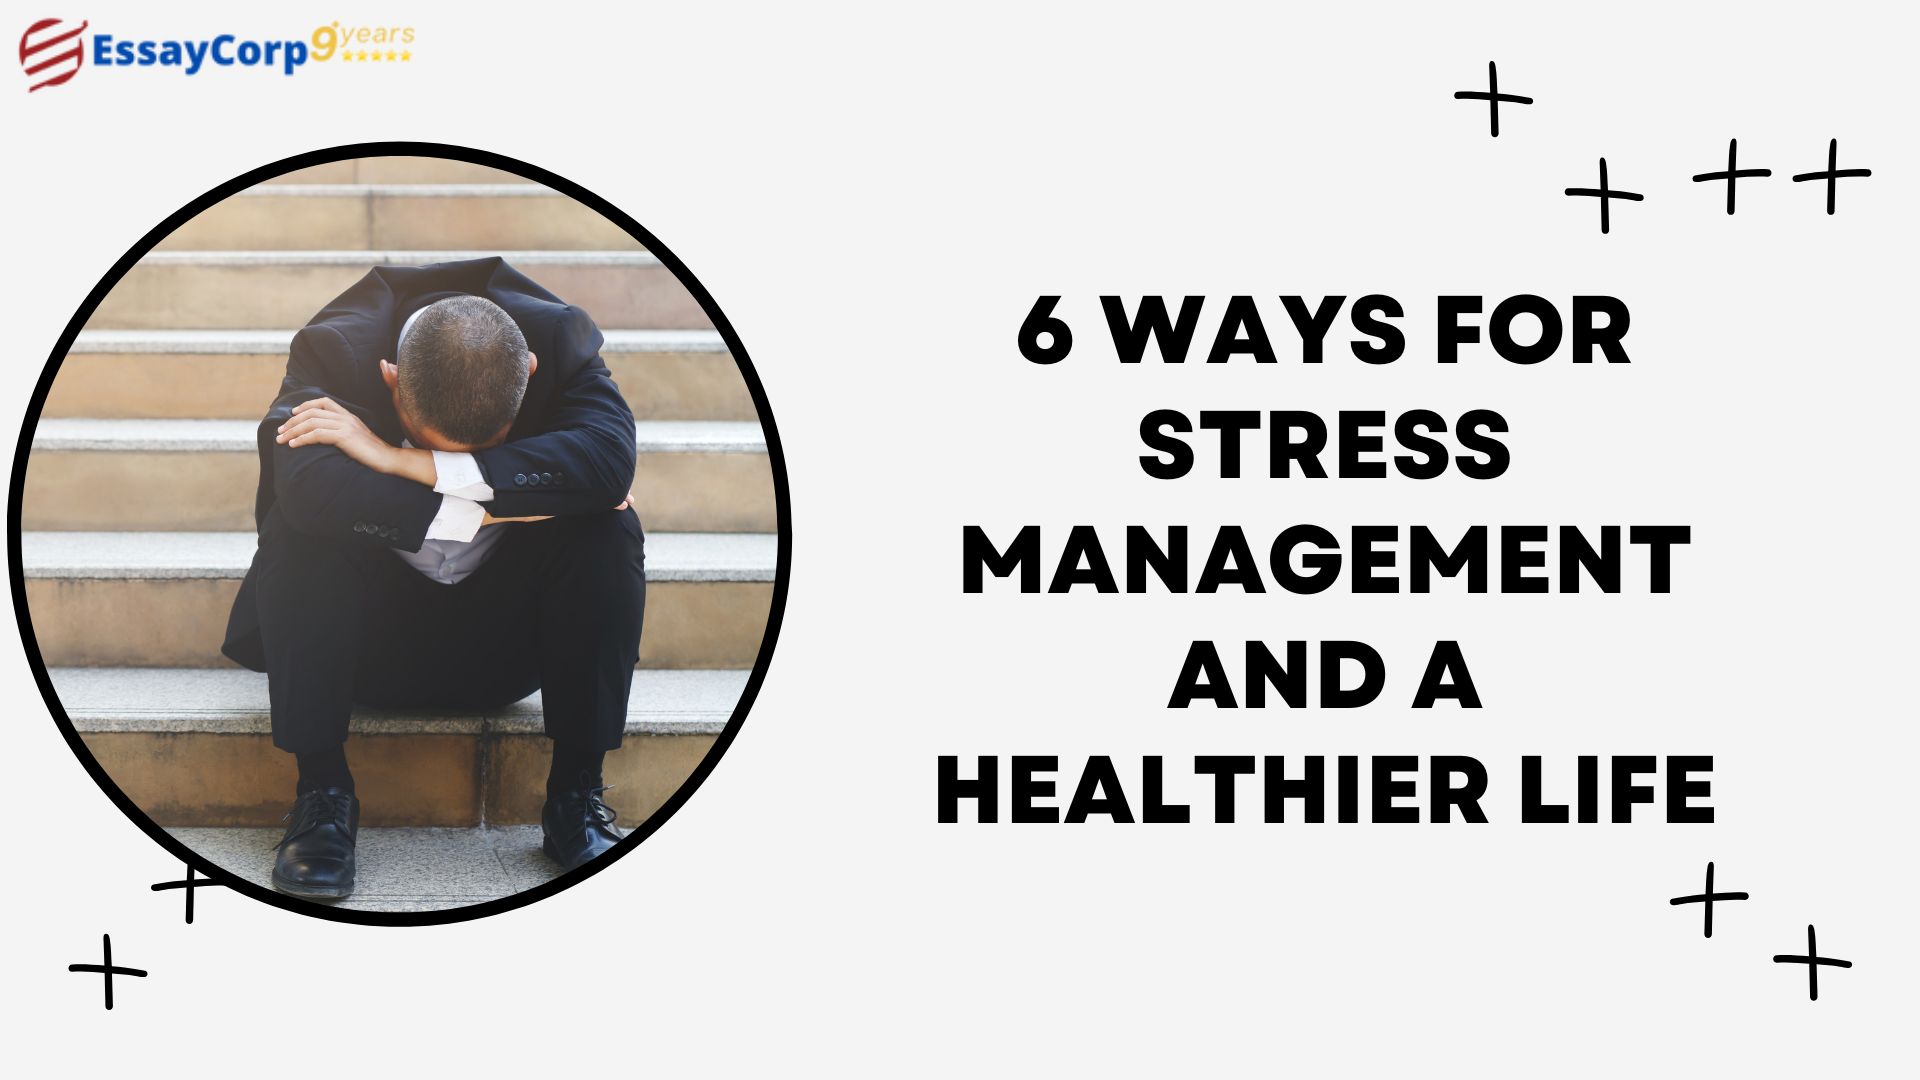 What Are The 6 Useful Ways For Stress Management